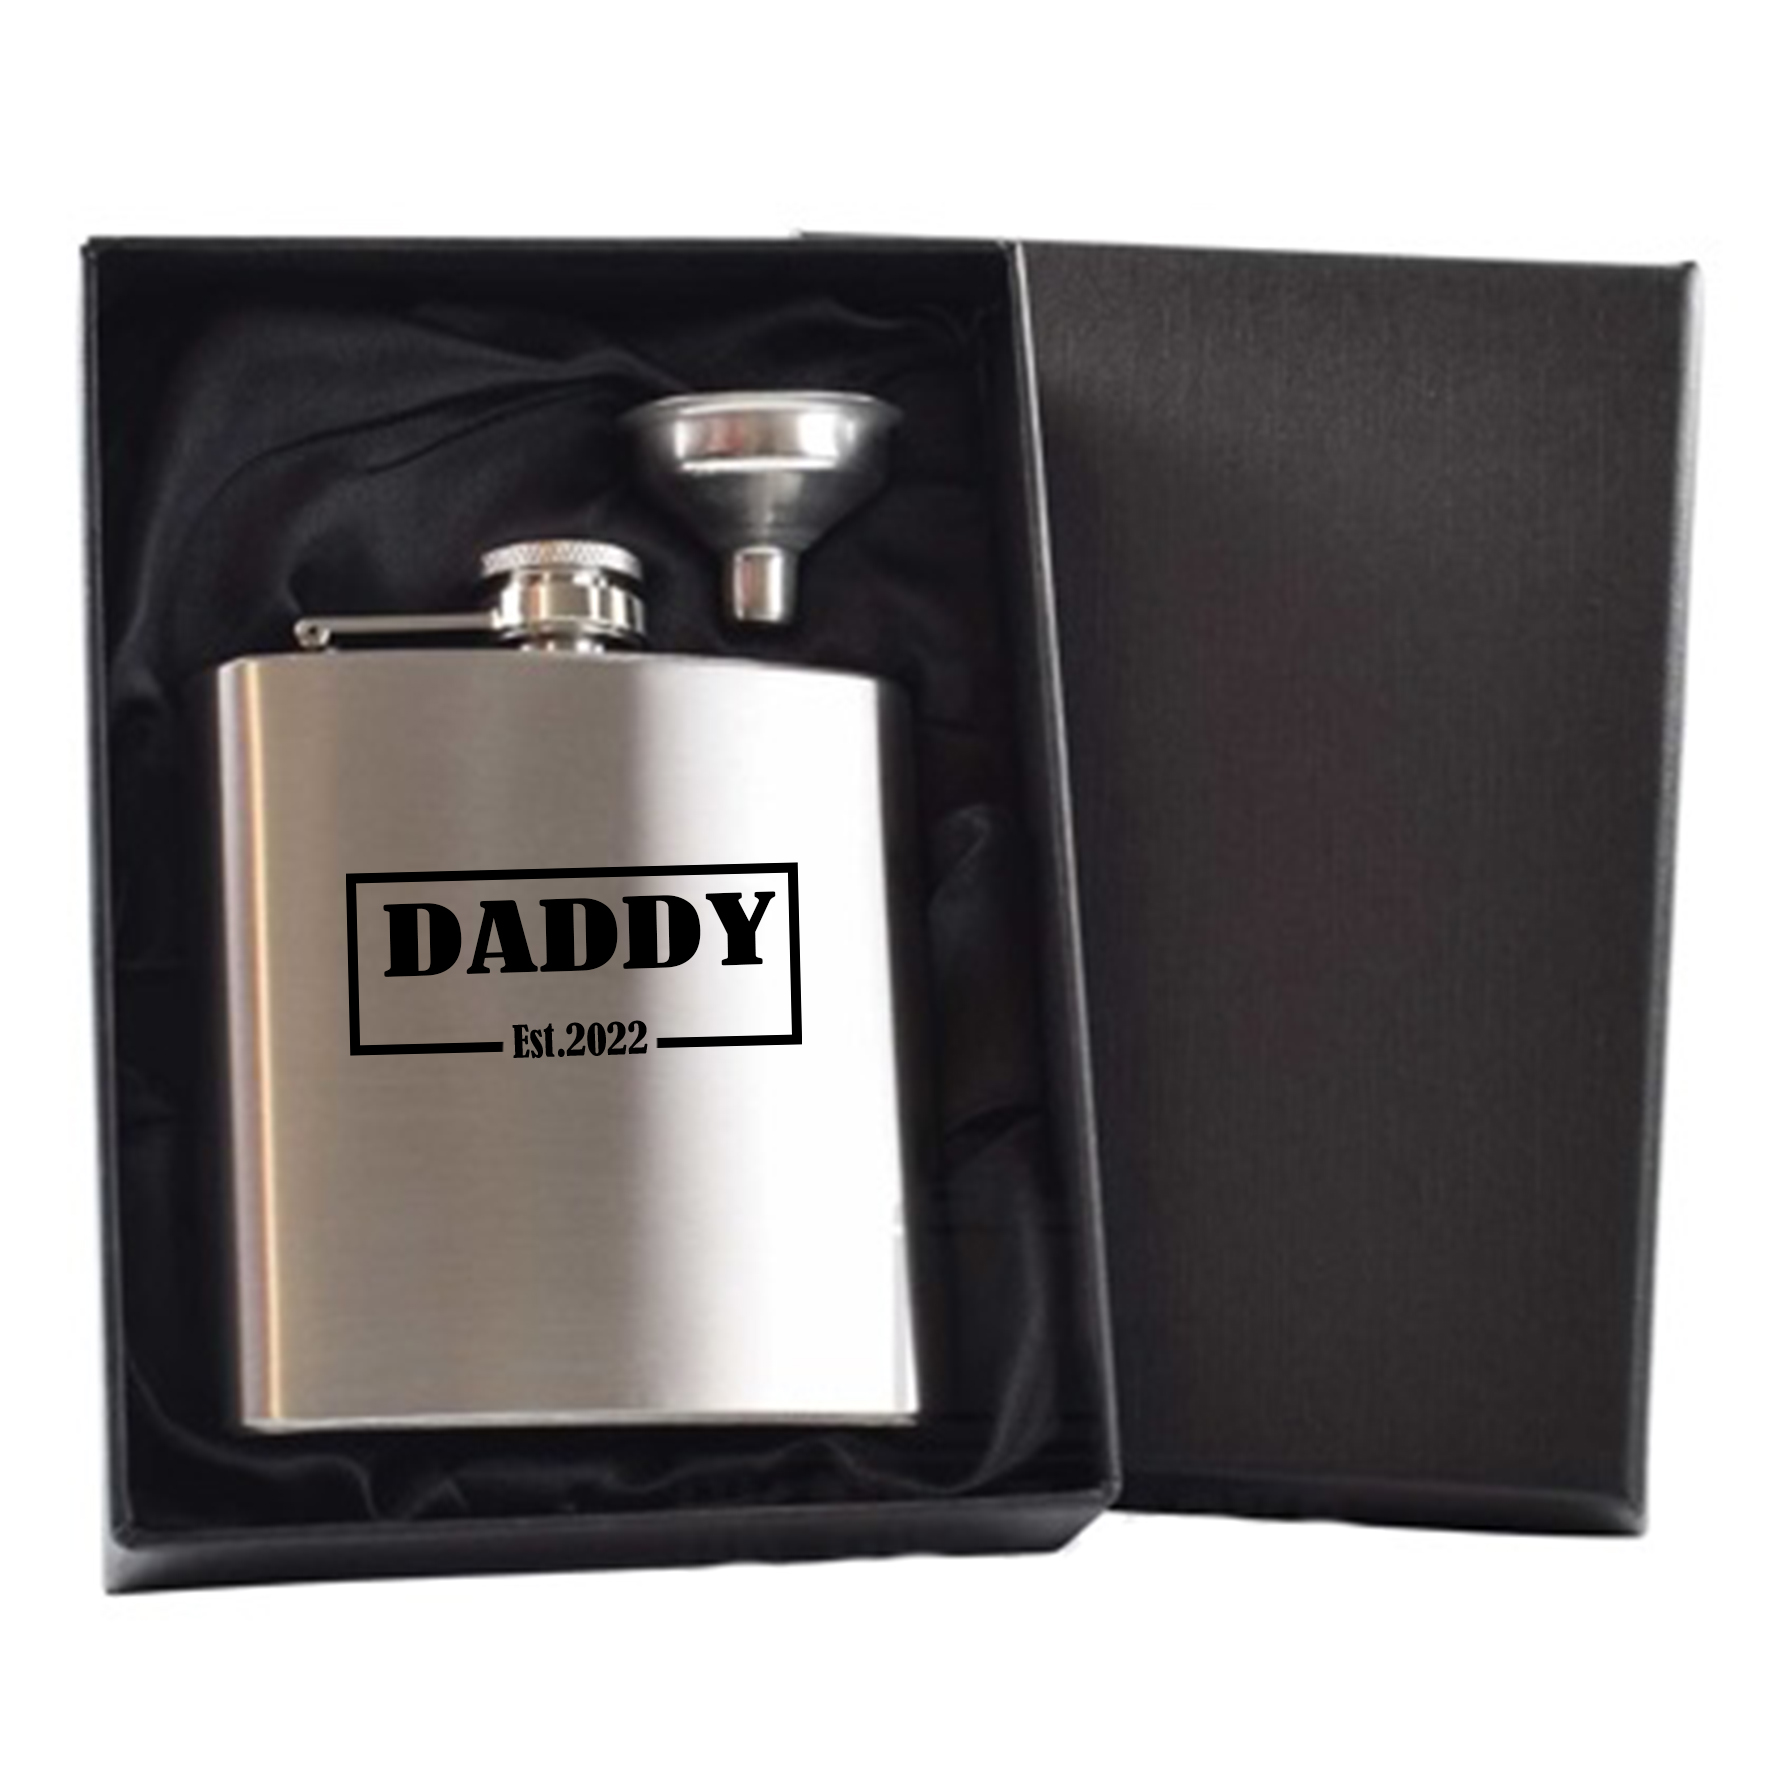 Silver hip flask in black gift box personalised with Daddy est design Hip Flask Gift Sets